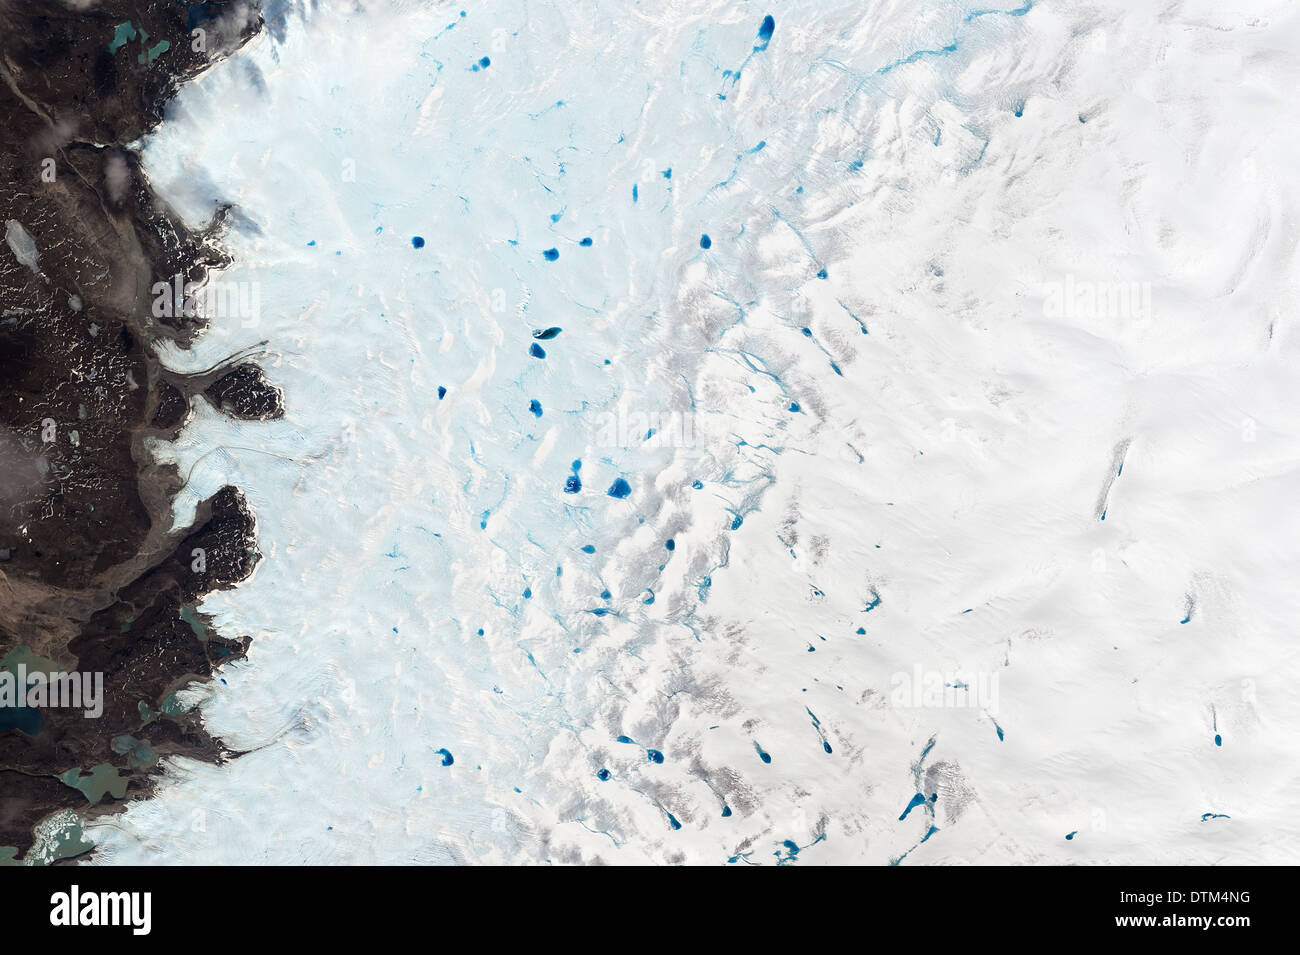 pools of blue meltwater on Greenlands ice show in springtime as seen in NASA's Landsat 8 image from space. Stock Photo